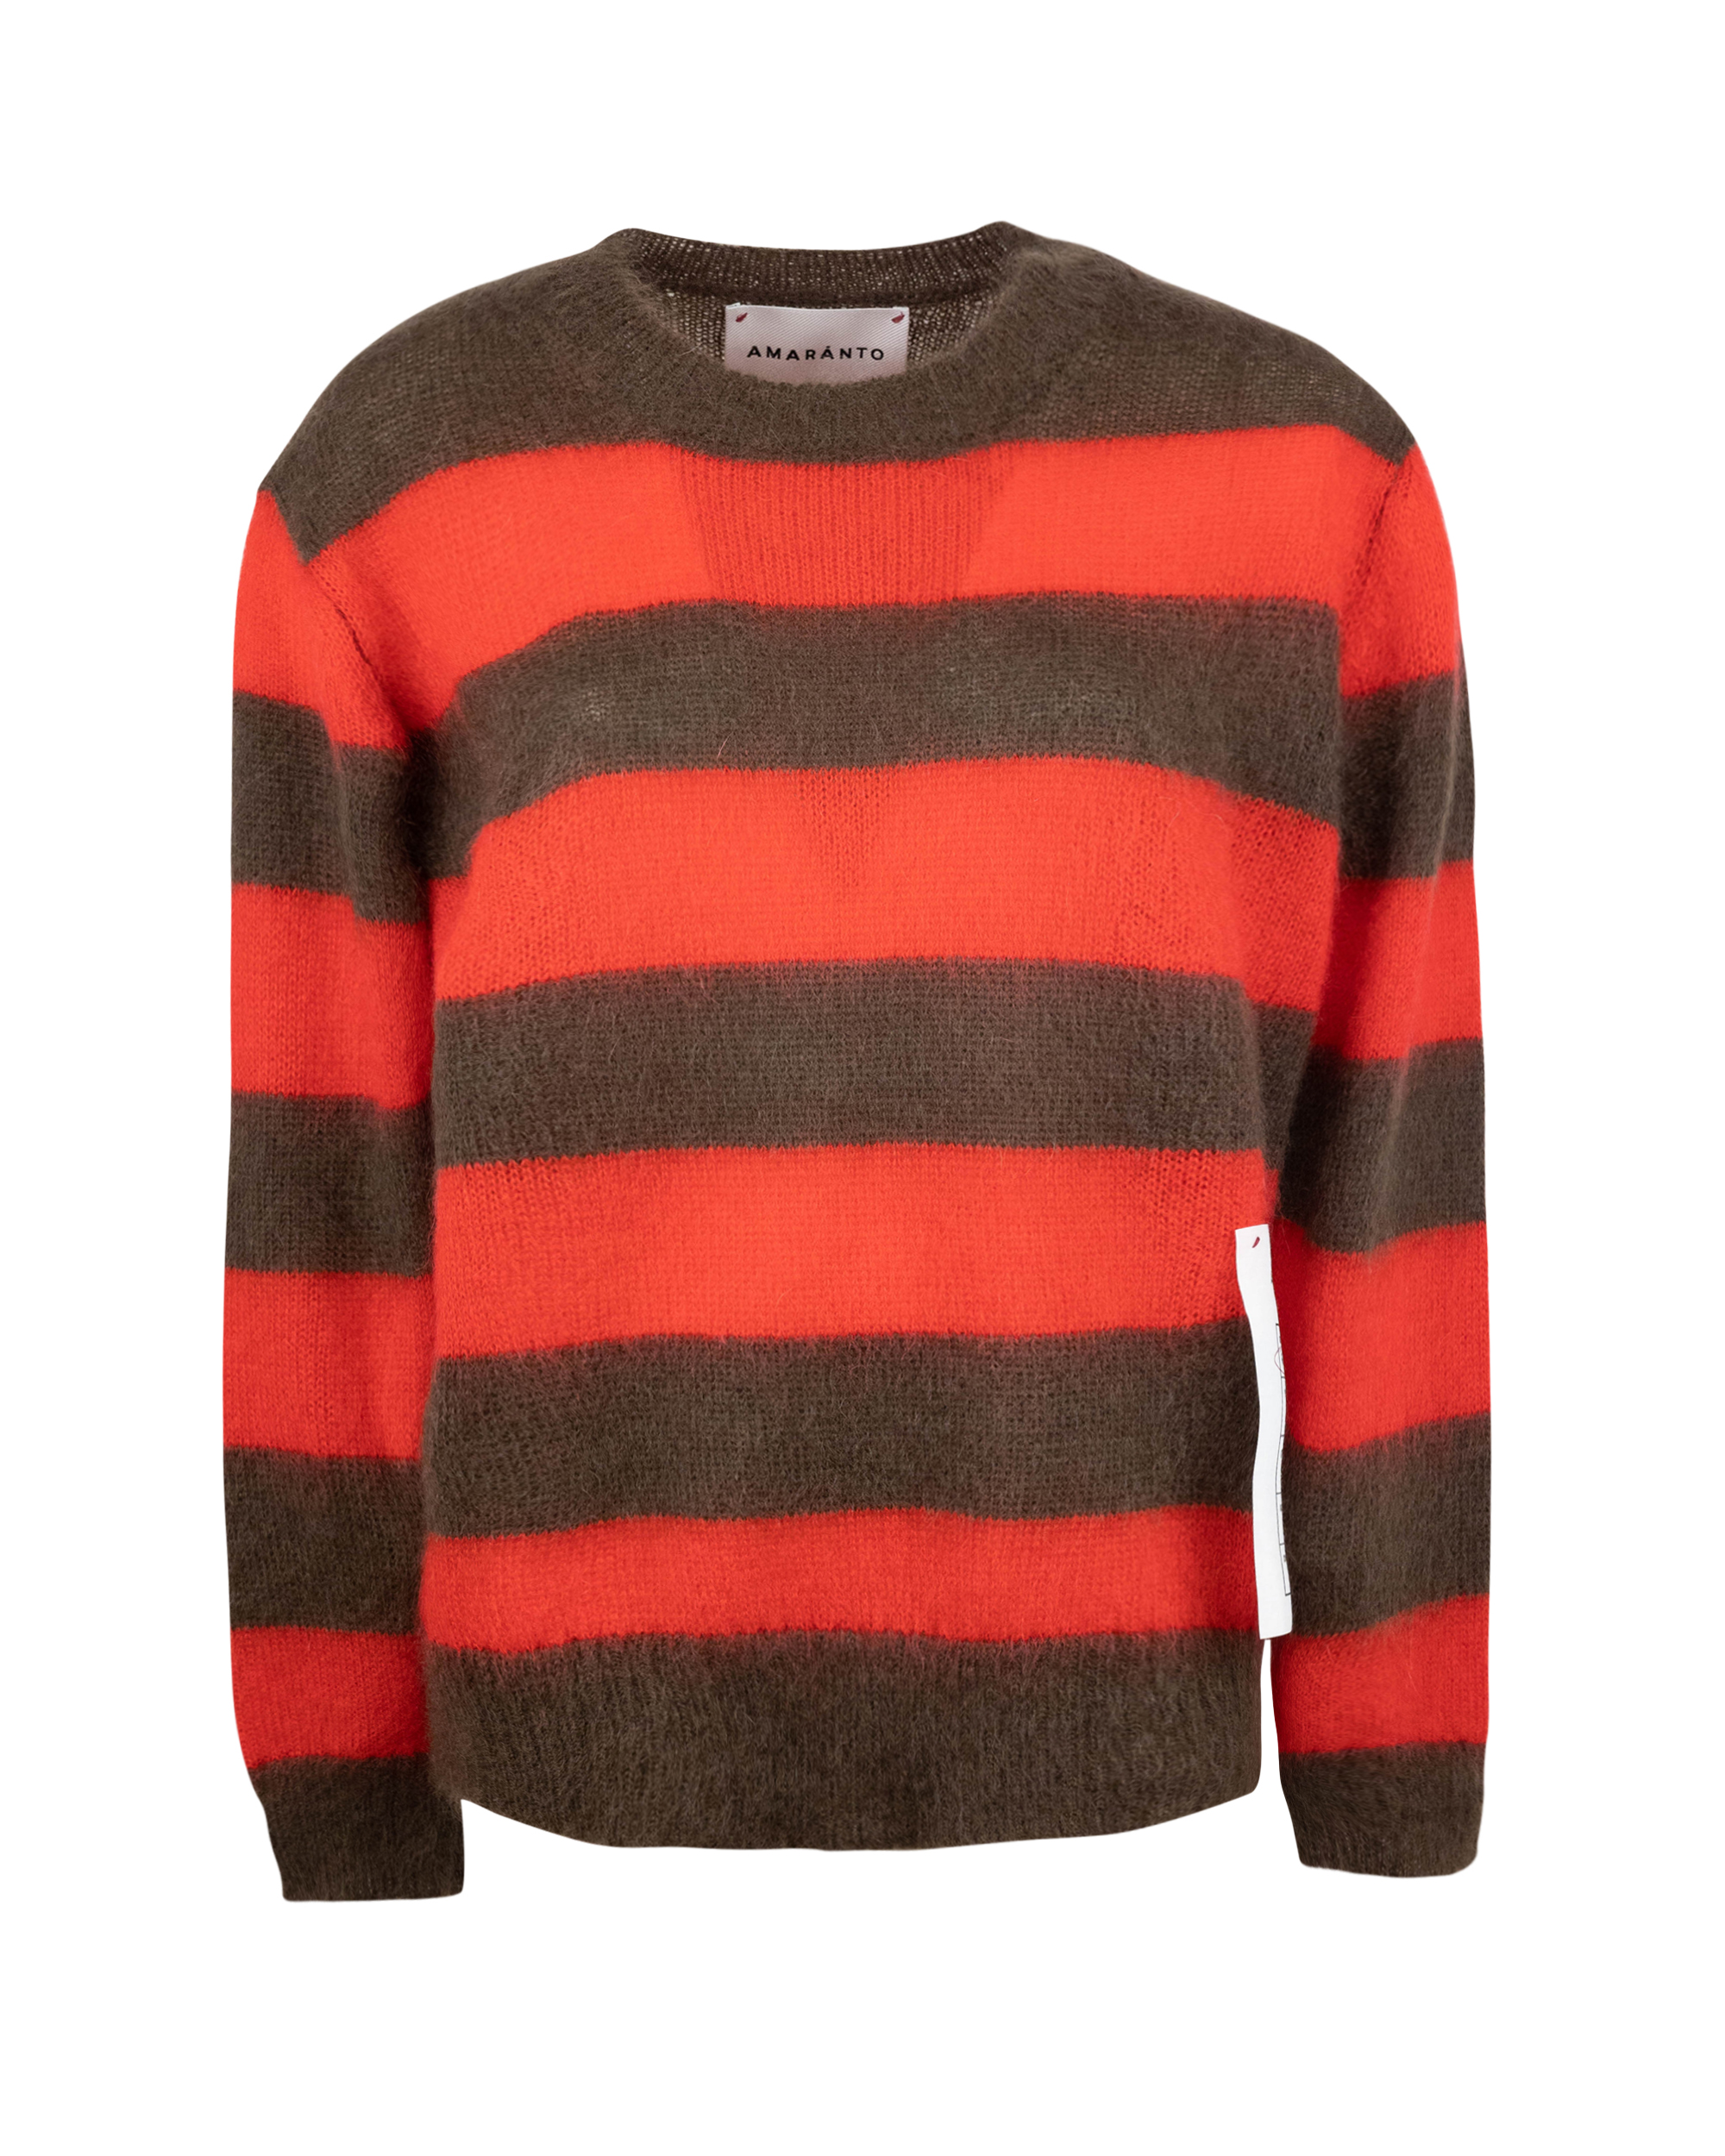 AMARANTO STRIPED SWEATER IN MOHAIR BLEND